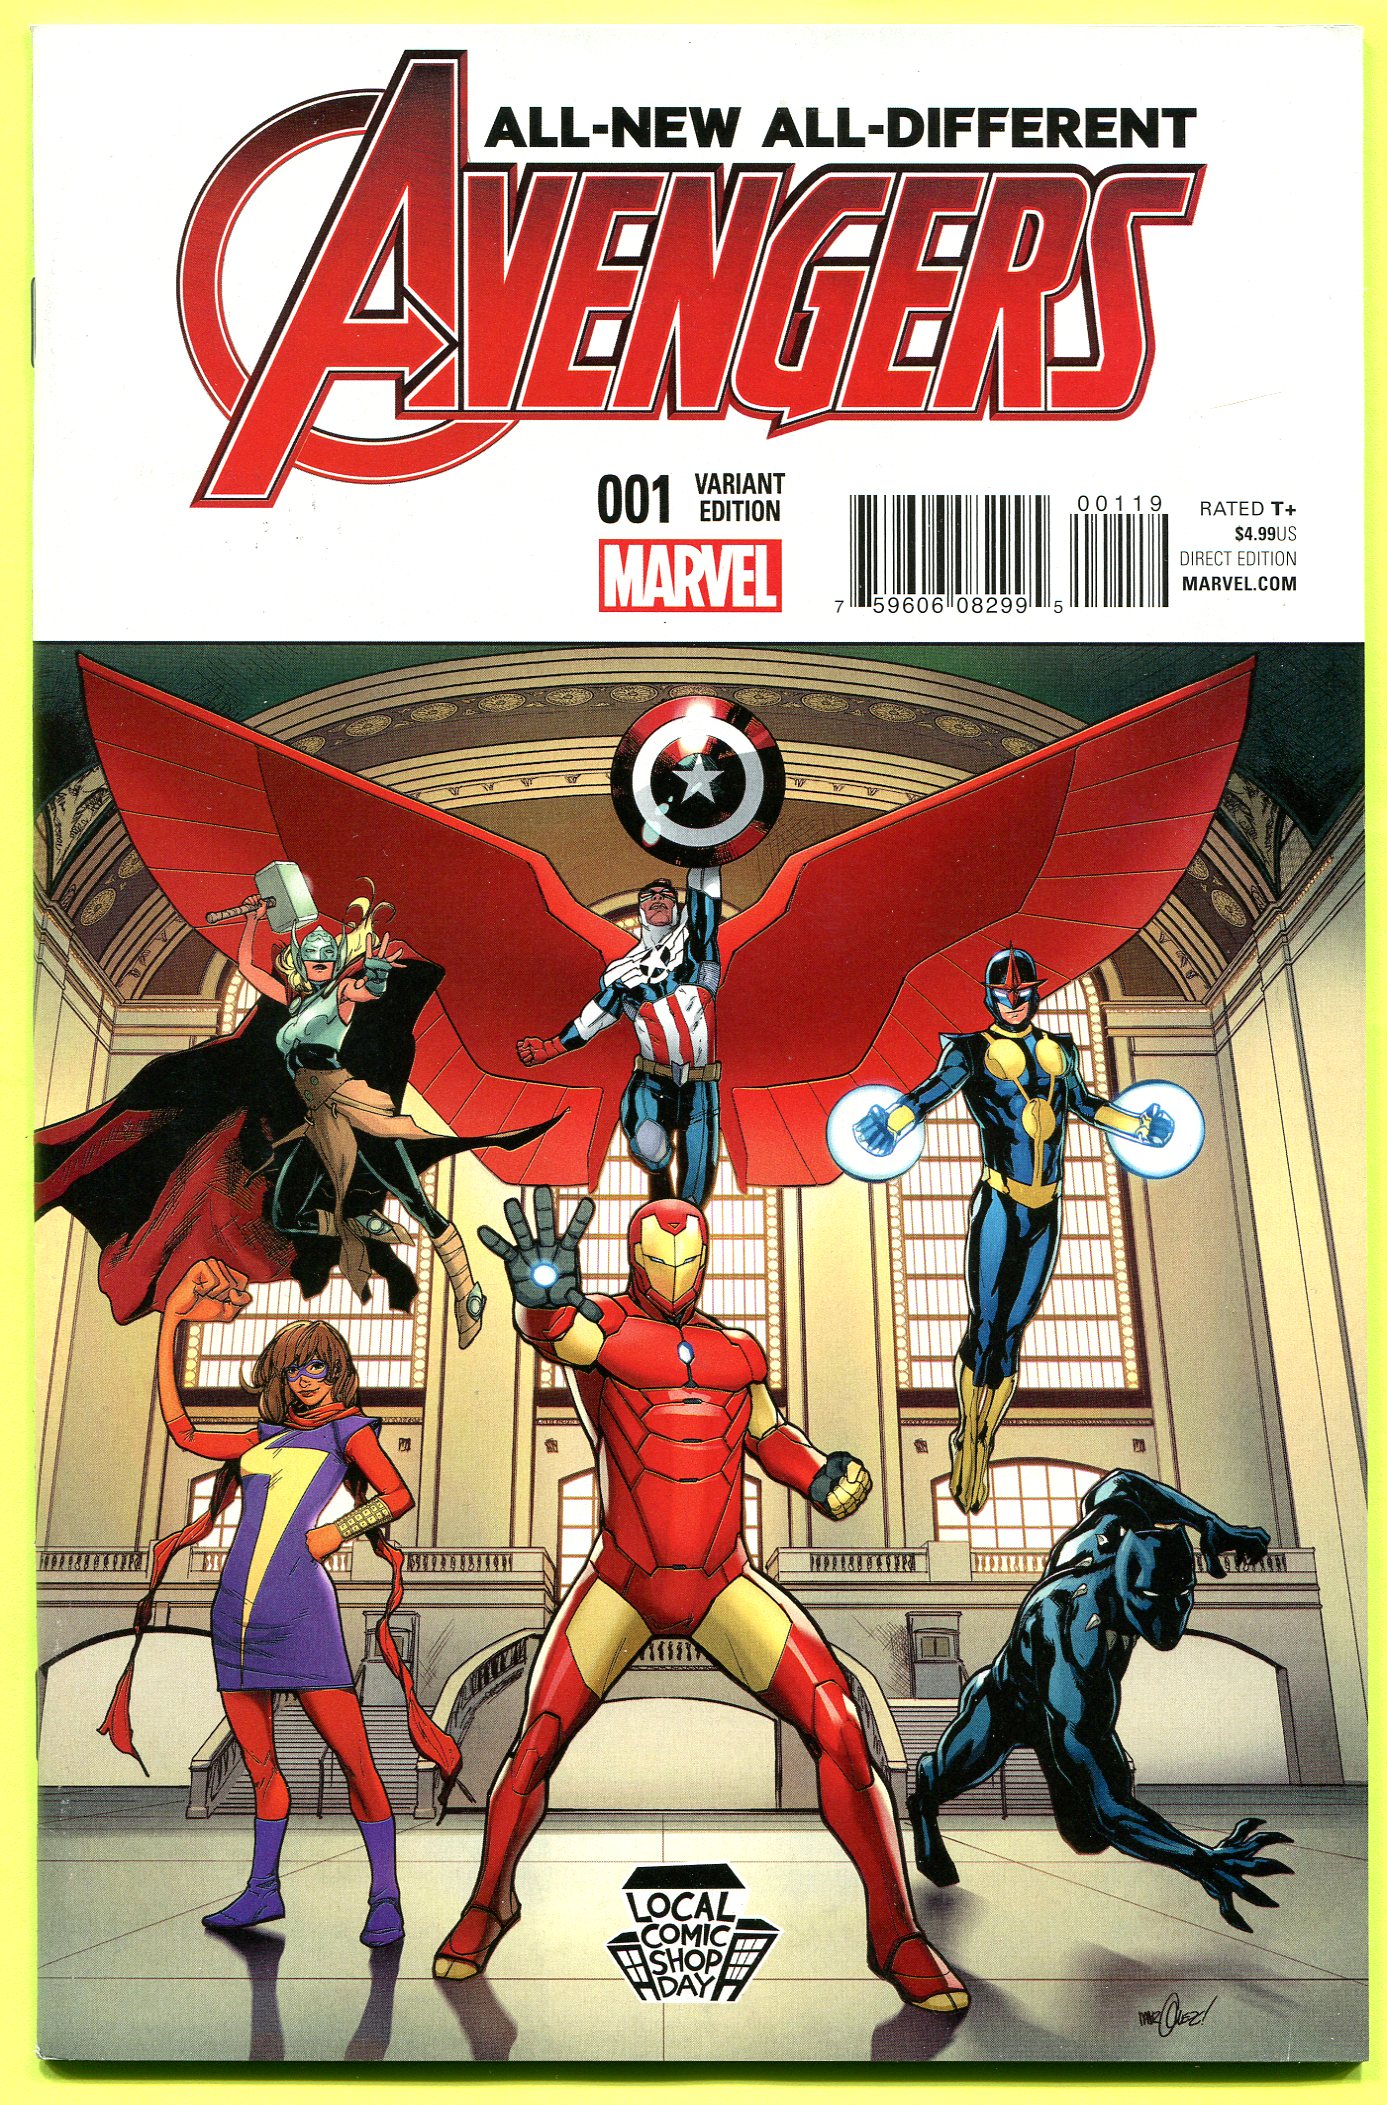 All New All Different Avengers 1 Local Comic Book Day Variant Cover Marvel Lcsd Ebay